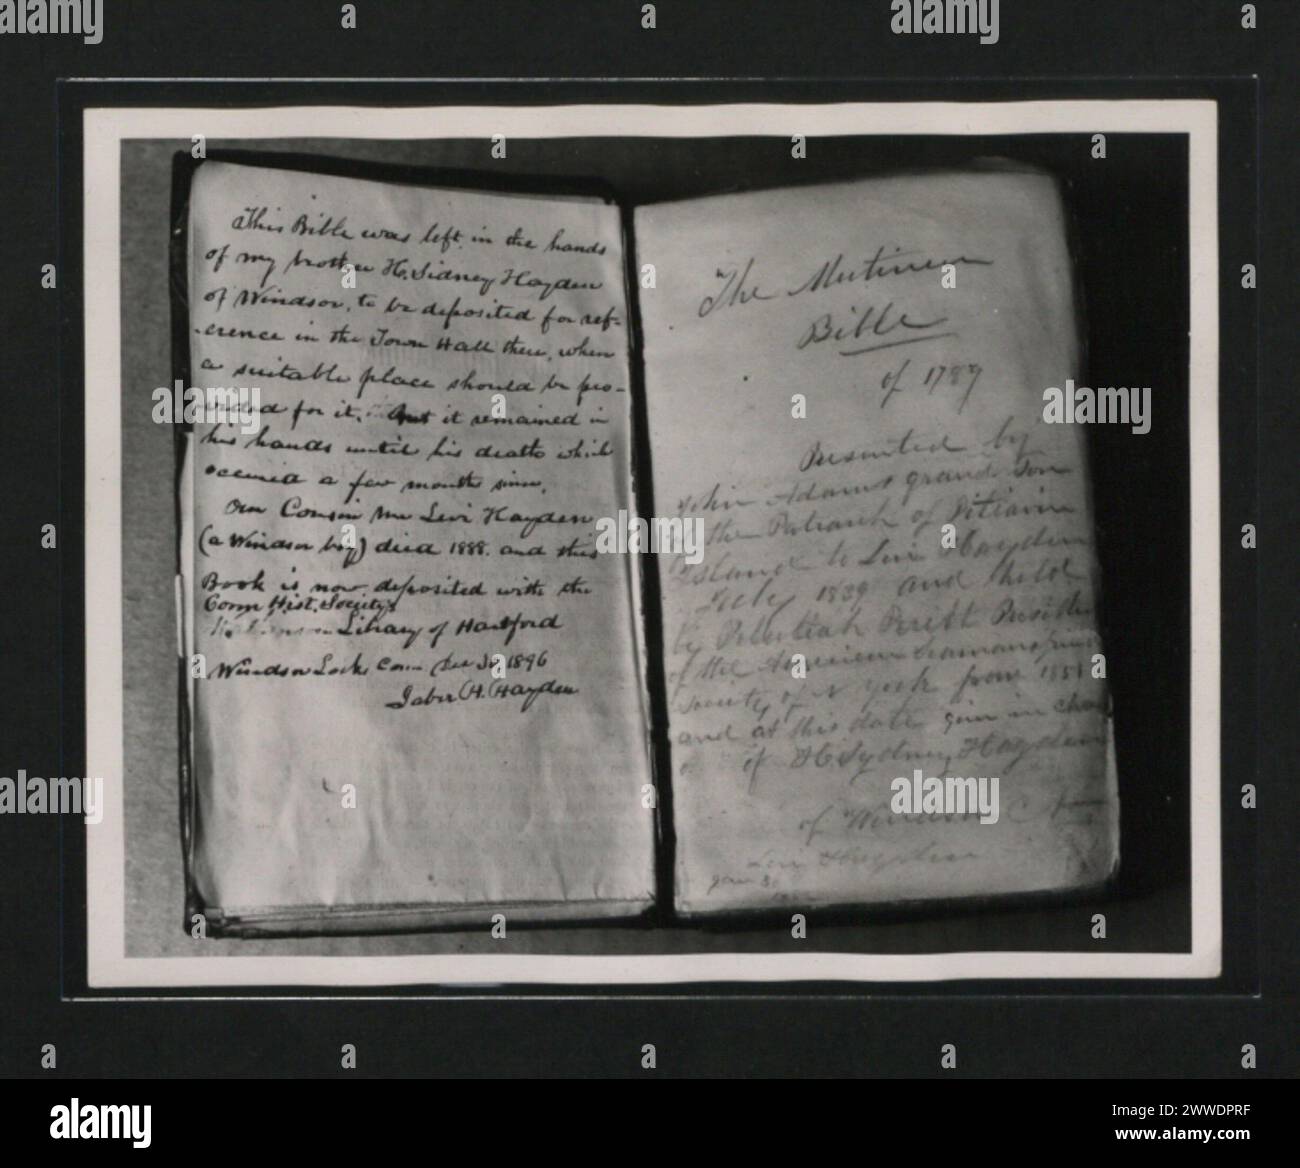 Description: The opening page of the Bible, with the original handwriting of Levi Hayden, to whom the Bible was given by a grandson of John Adams. Location: Pitcairn Islands Stock Photo